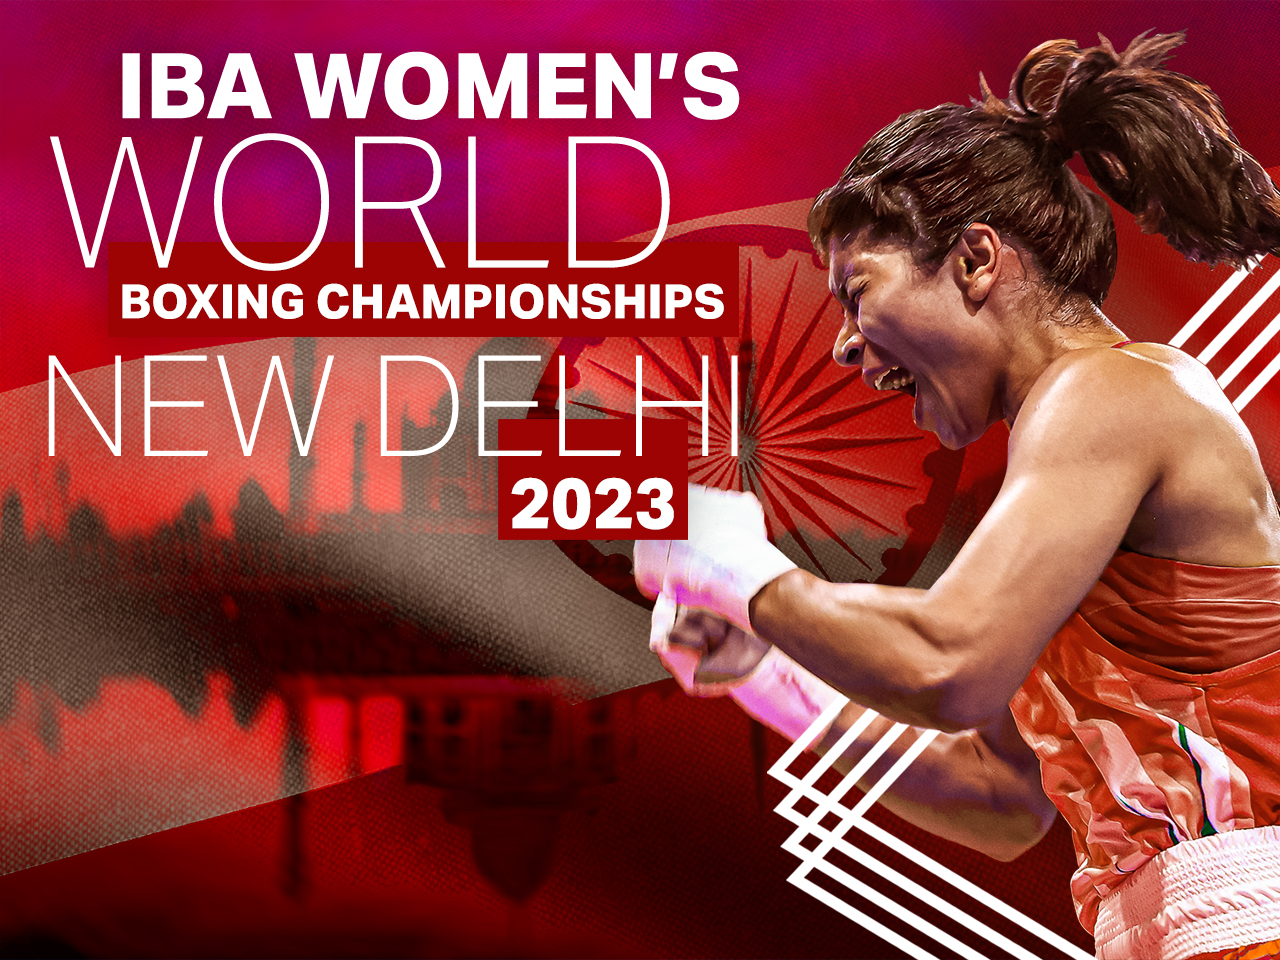 India is getting ready for home edition of IBA Women’s World Boxing